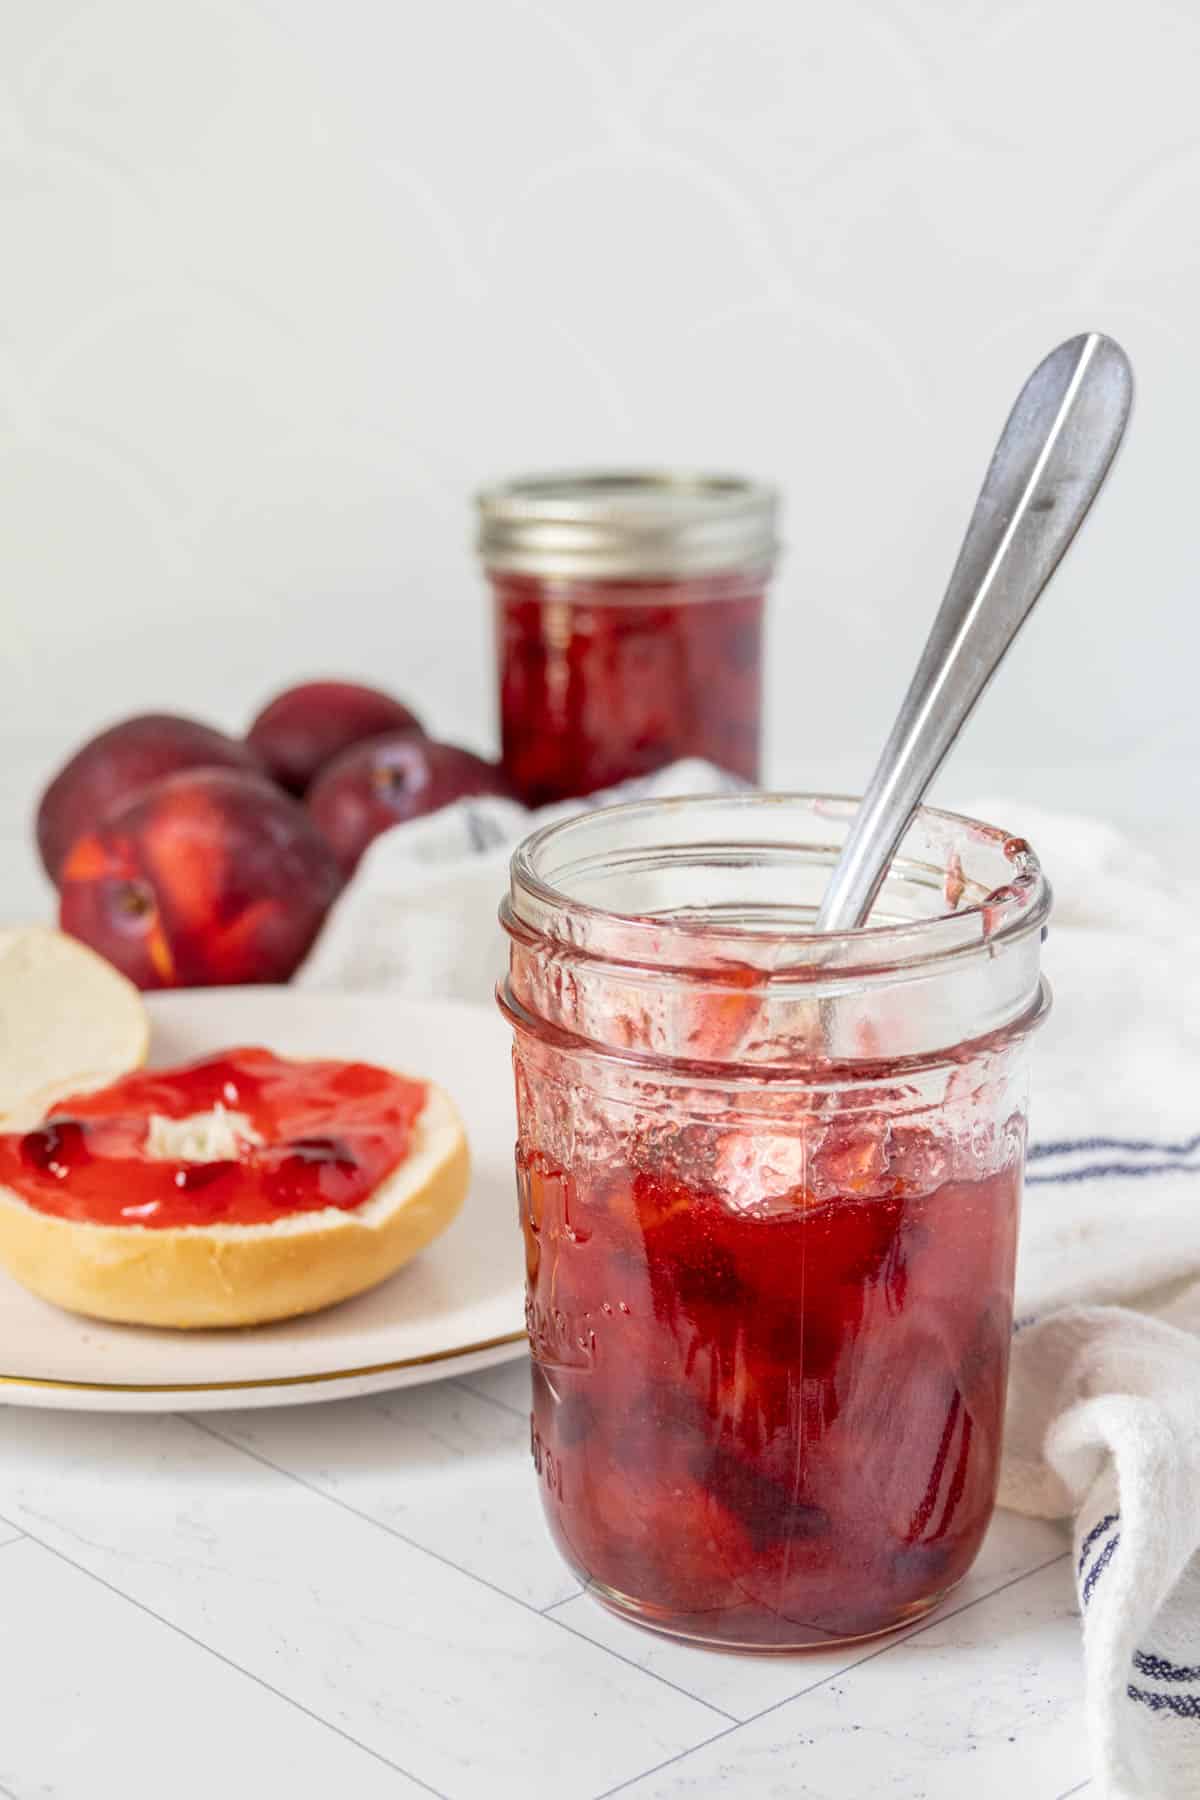 A jar of plum jam with a spoon next to it.